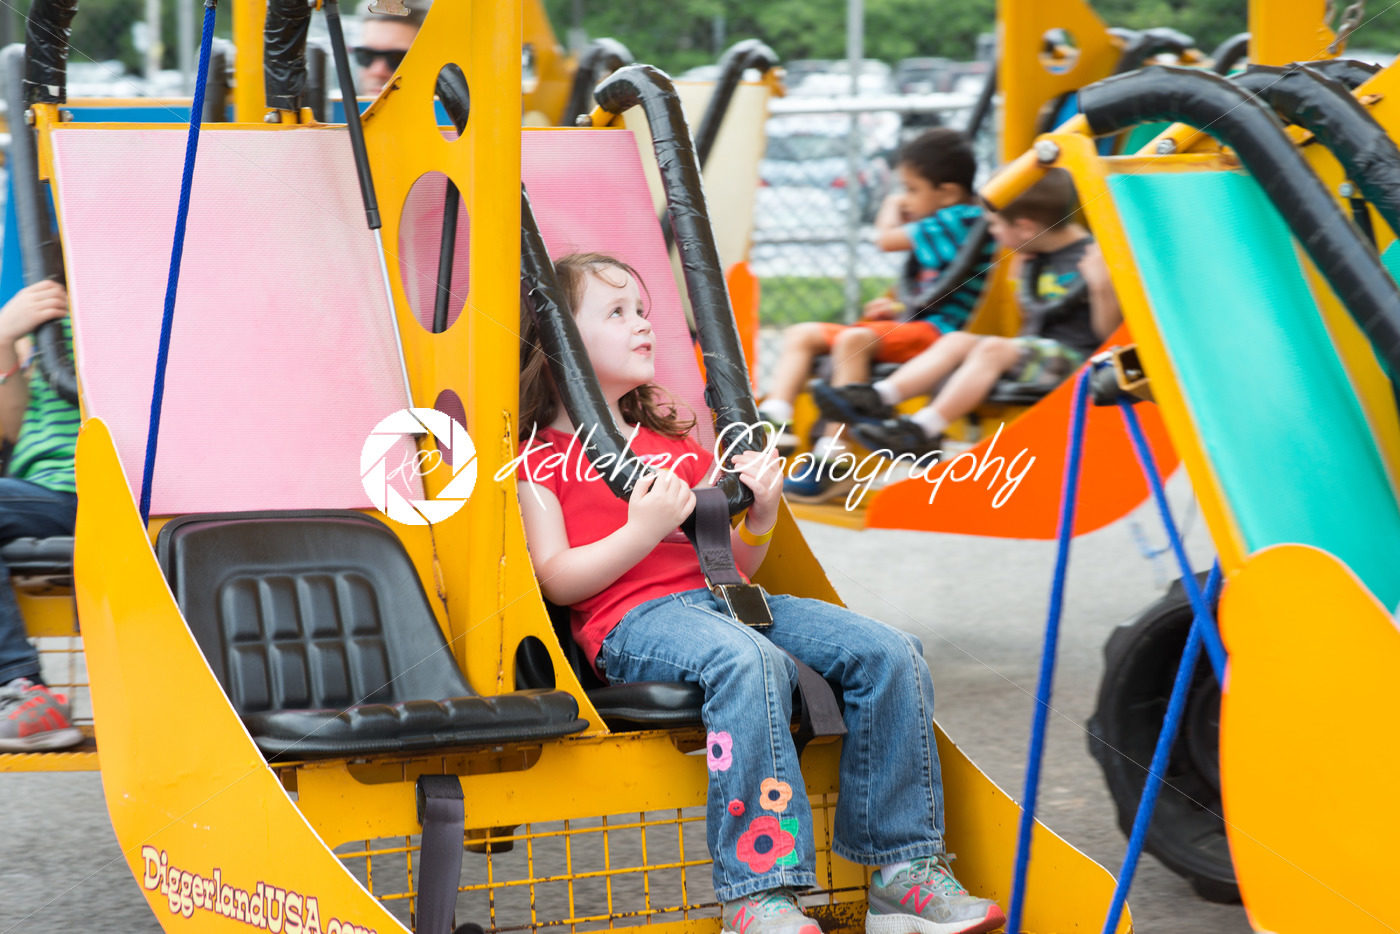 WEST BERLIN, NJ – MAY 28: Diggerland USA, the only construction themed adventure park in North America where children and families can operate actual machinery on May 28, 2017 - Kelleher Photography Store